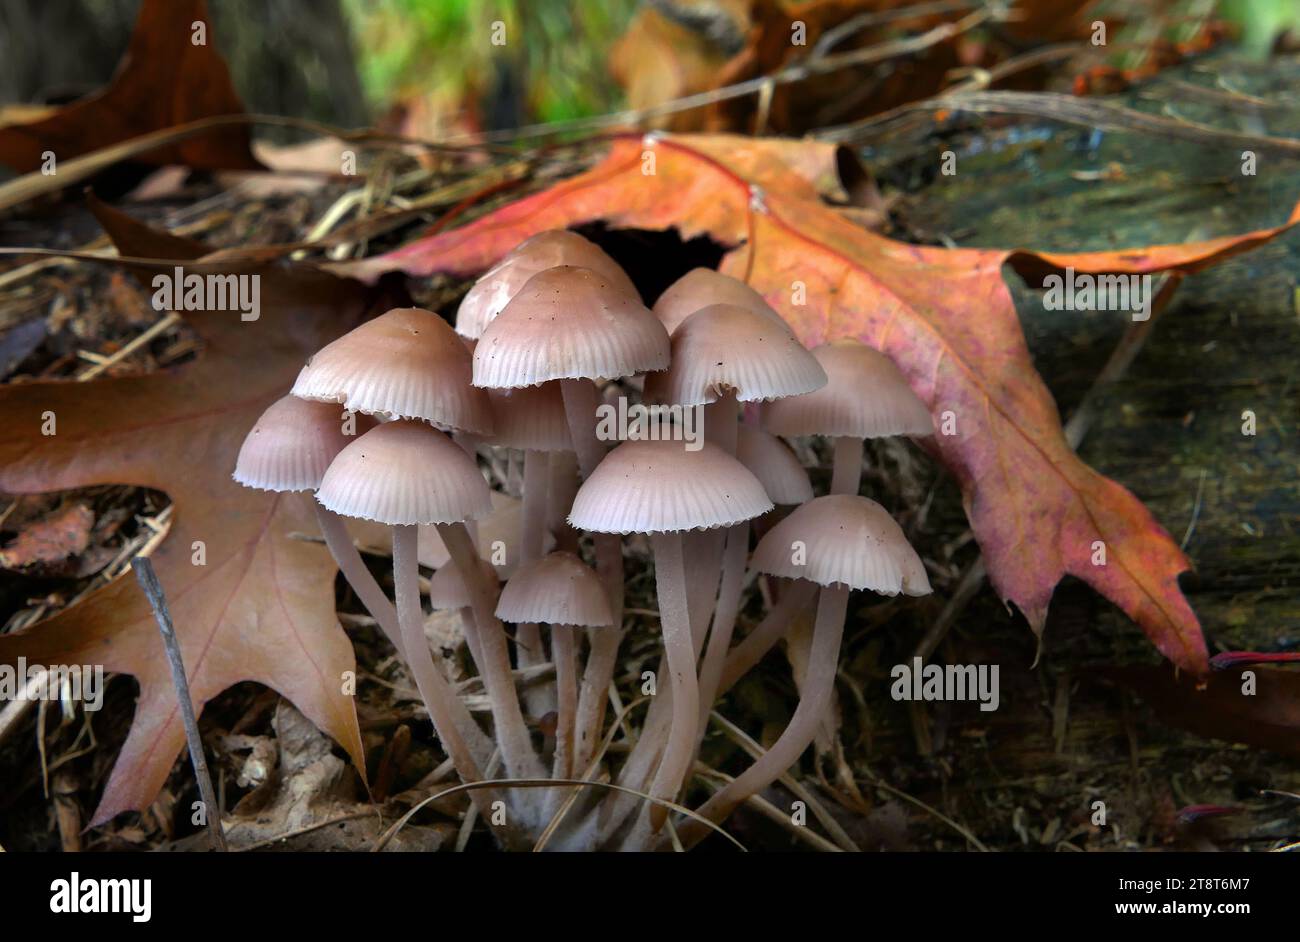 Mycena sp, Mycena is a large genus of small saprotrophic mushrooms that are rarely more than a few centimeters in width. They are characterized by a white spore print, a small conical or bell-shaped cap, and a thin fragile stem. Most are gray or brown, but a few species have brighter colors Stock Photo